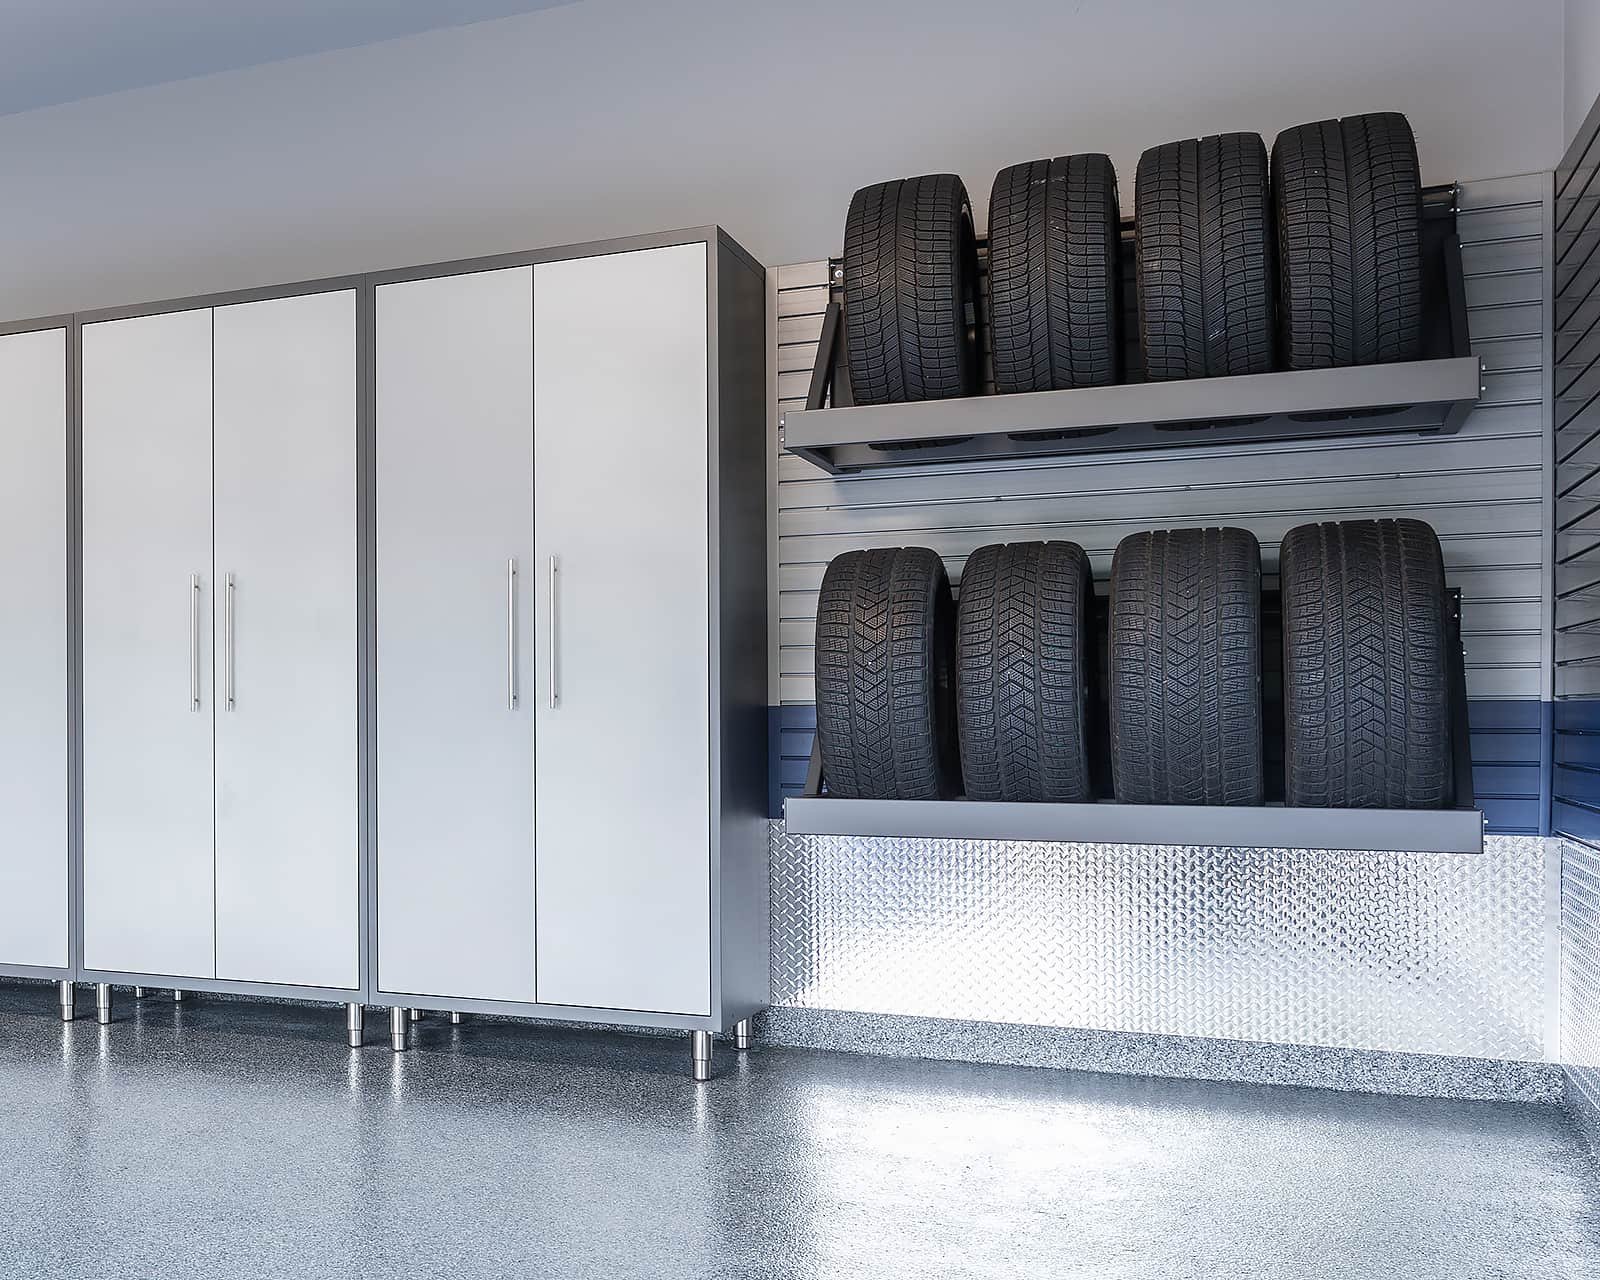 Home Tire Storage Ideas To Keep Your Garage More Organized